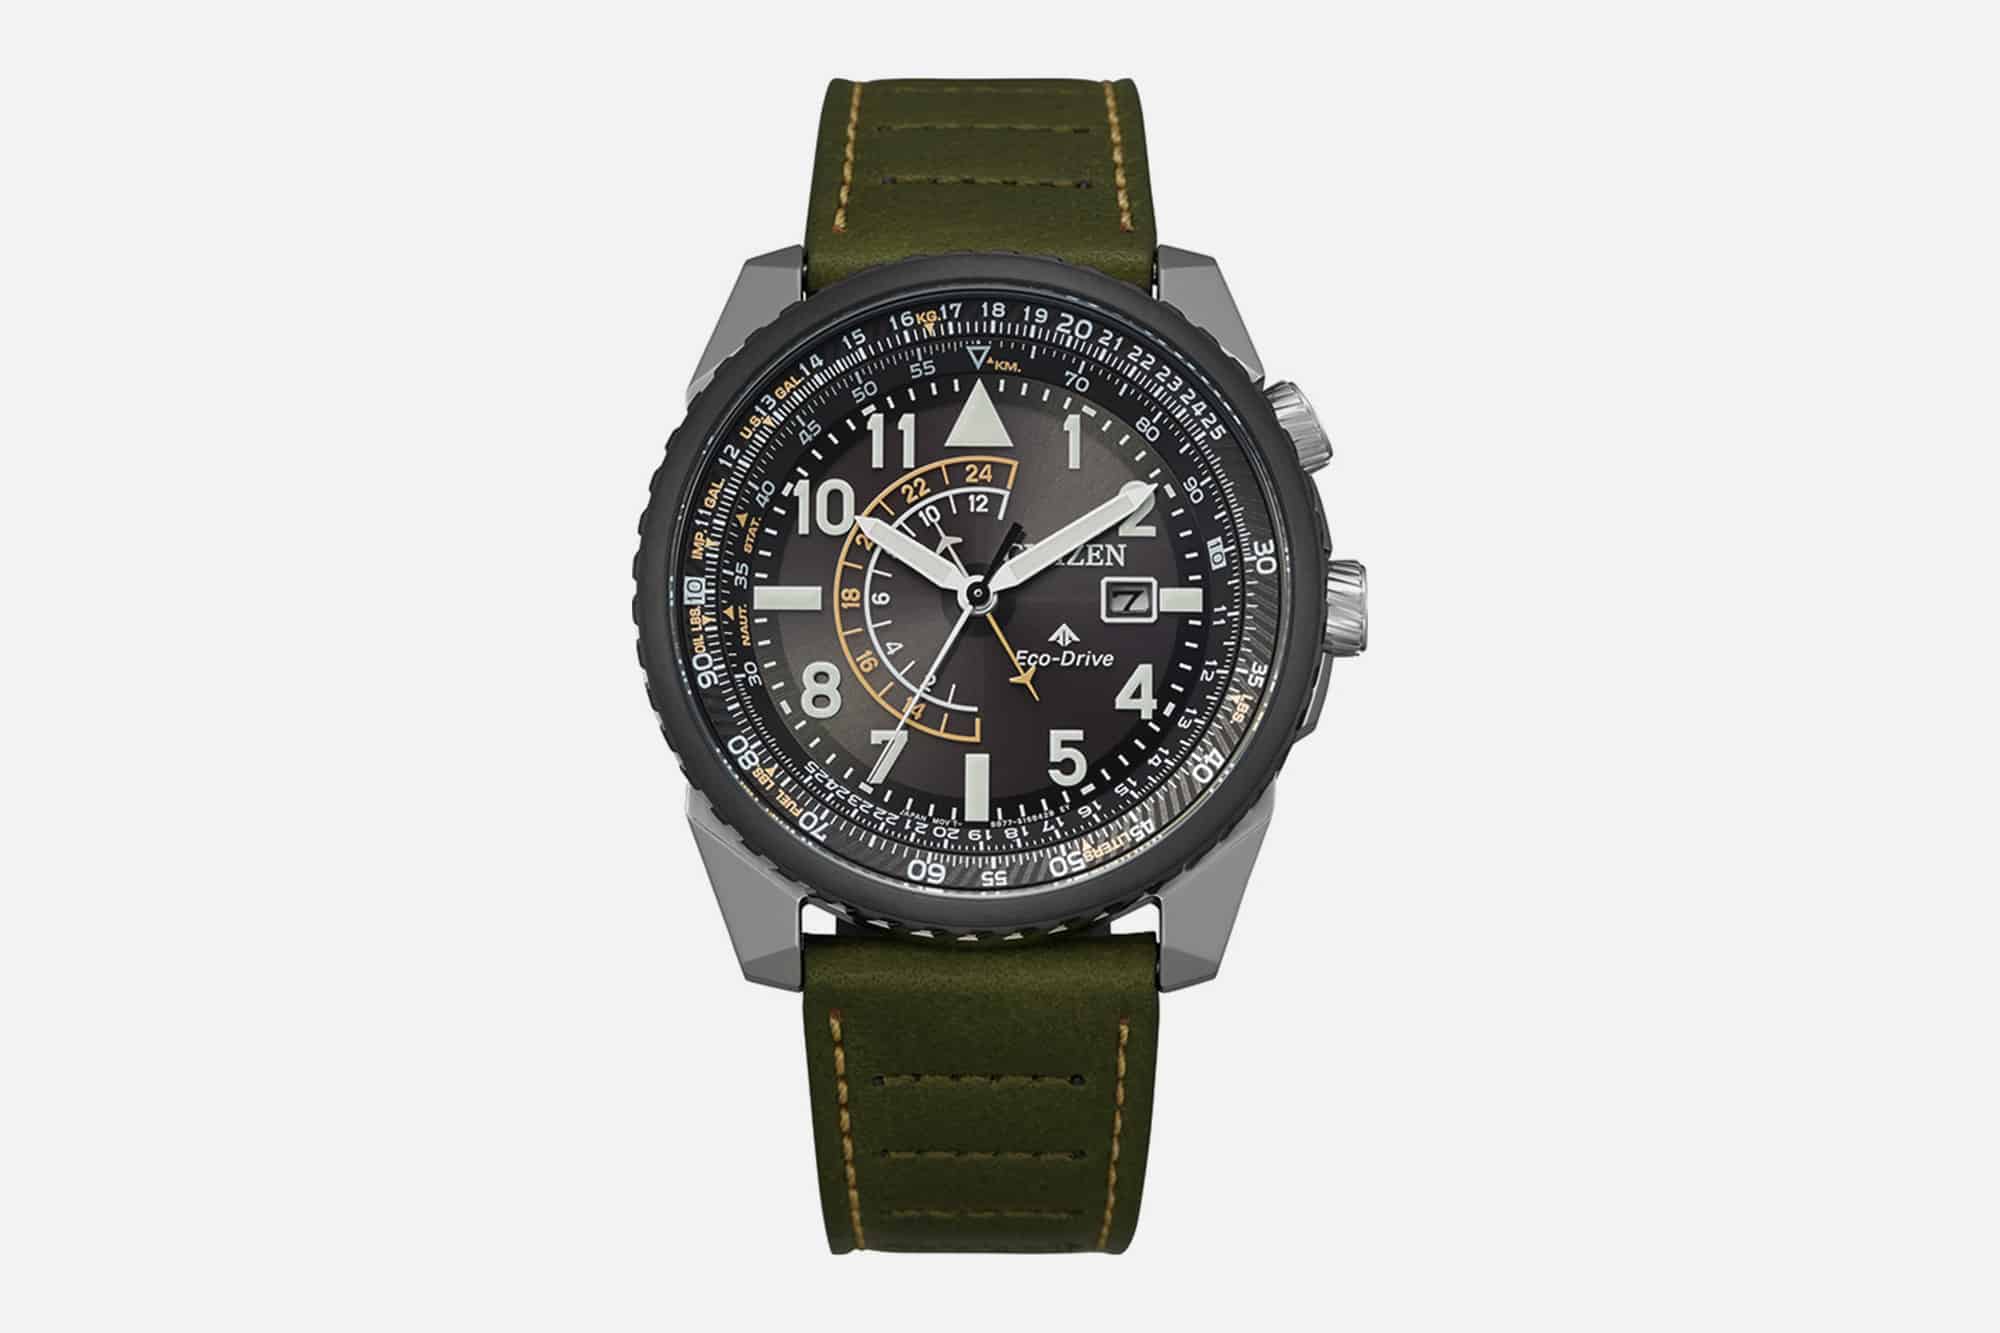 Citizen’s Newest Nighthawk Continues their Tradition of Robust, Aviation Inspired Timekeepers